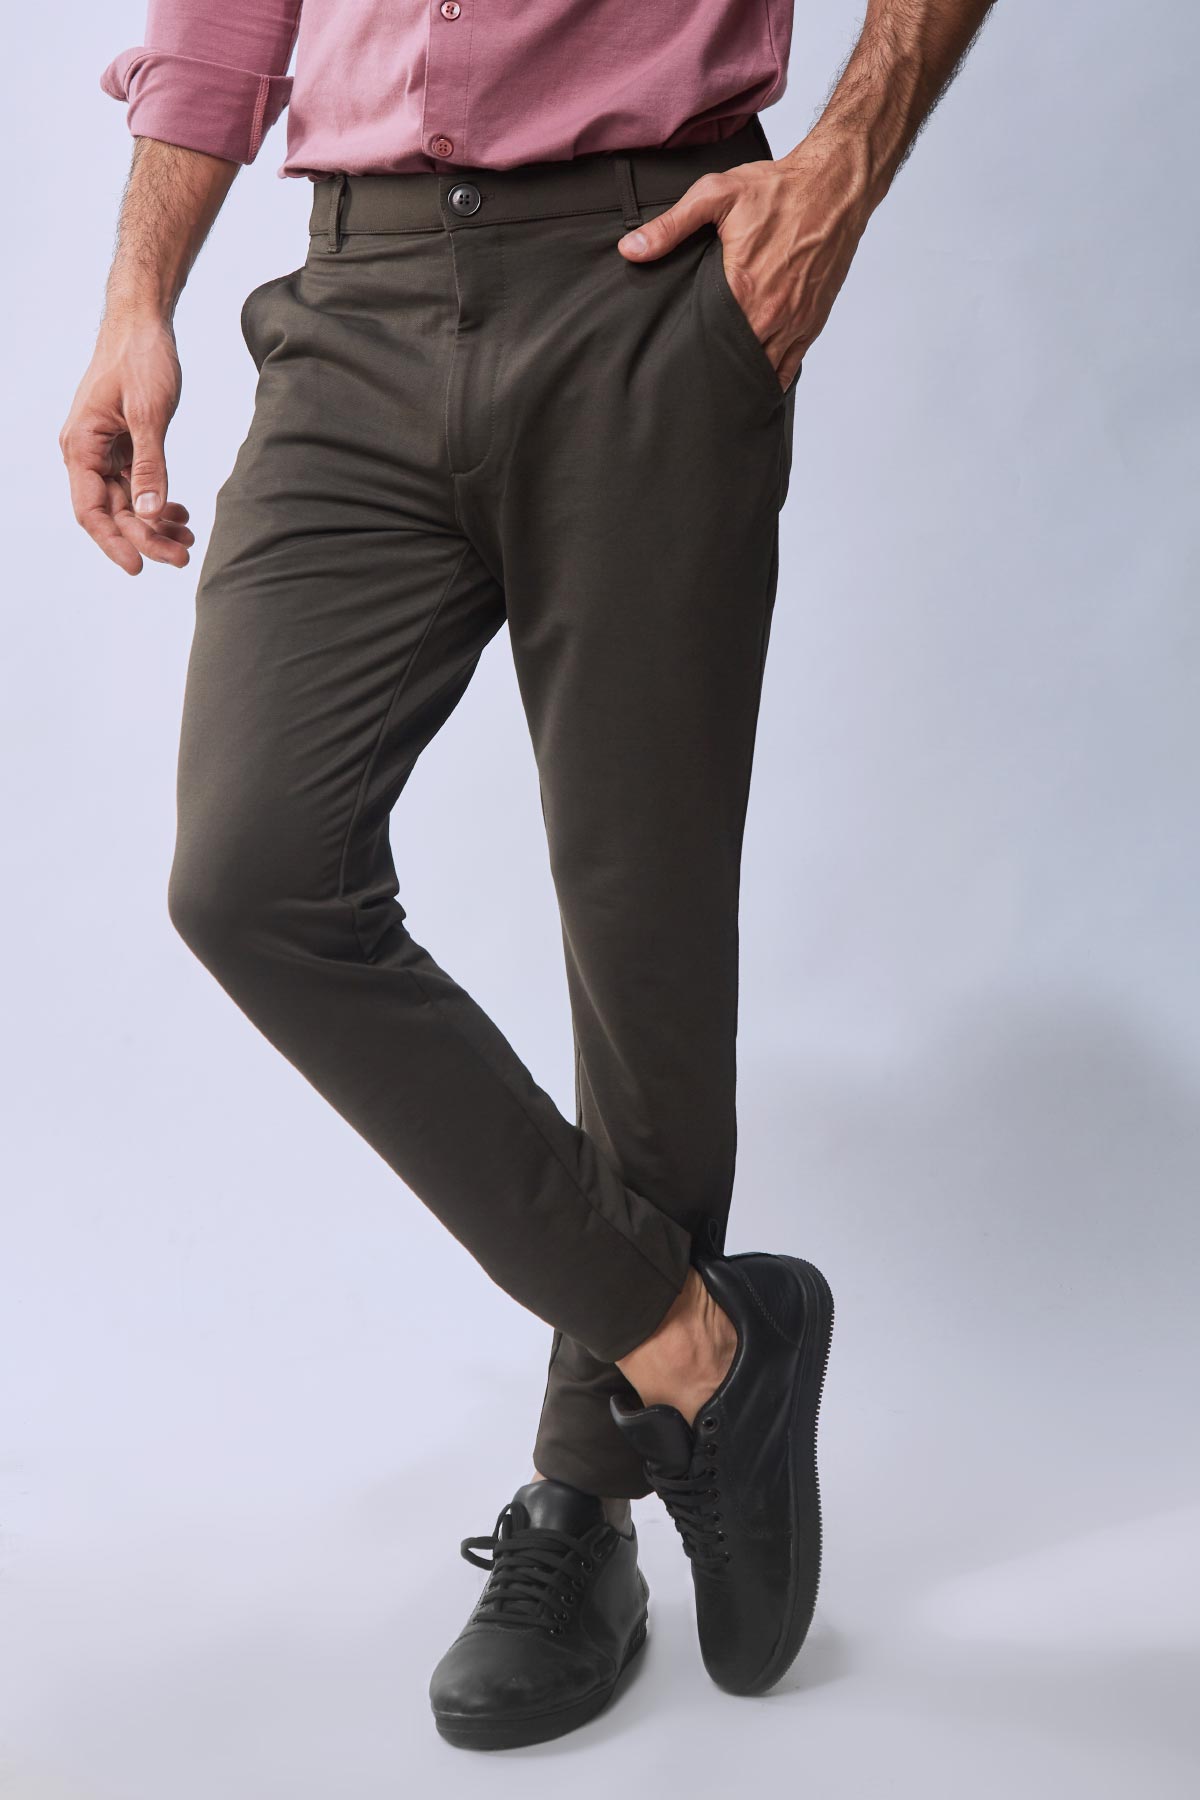 Buy Deep Pine Formal and casual Pant online for men Beyours